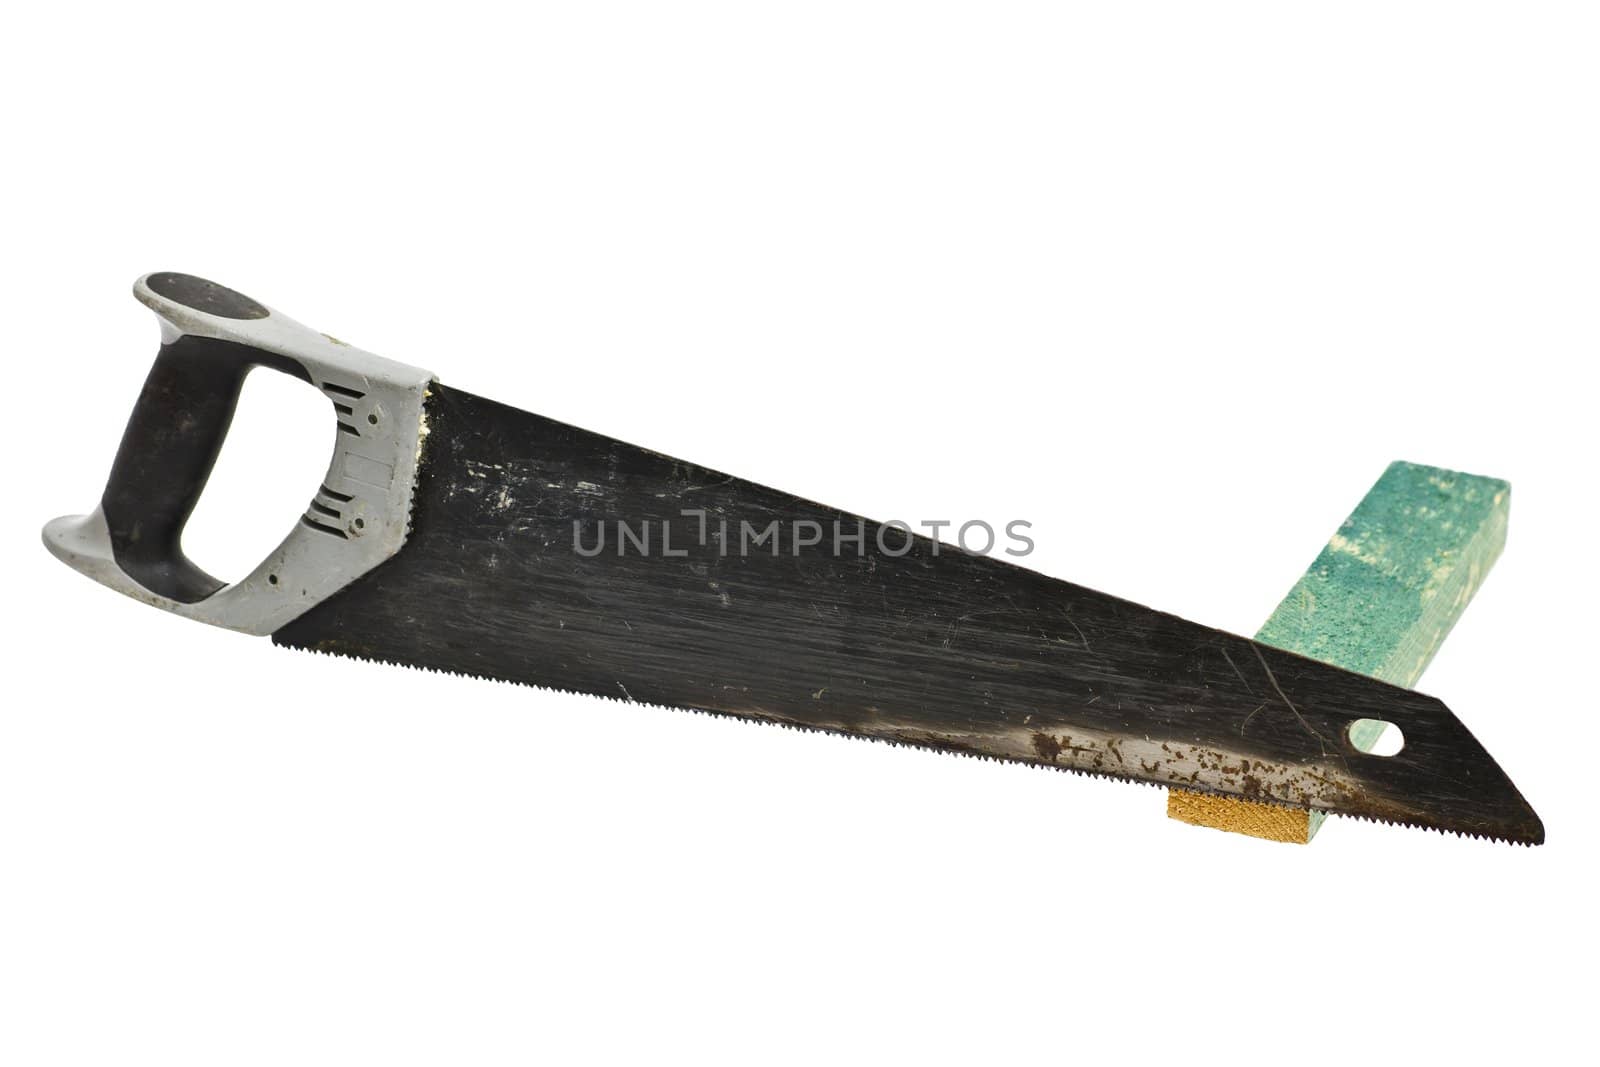 used hand saw with wood on white background. The saw has a grey plastic handle